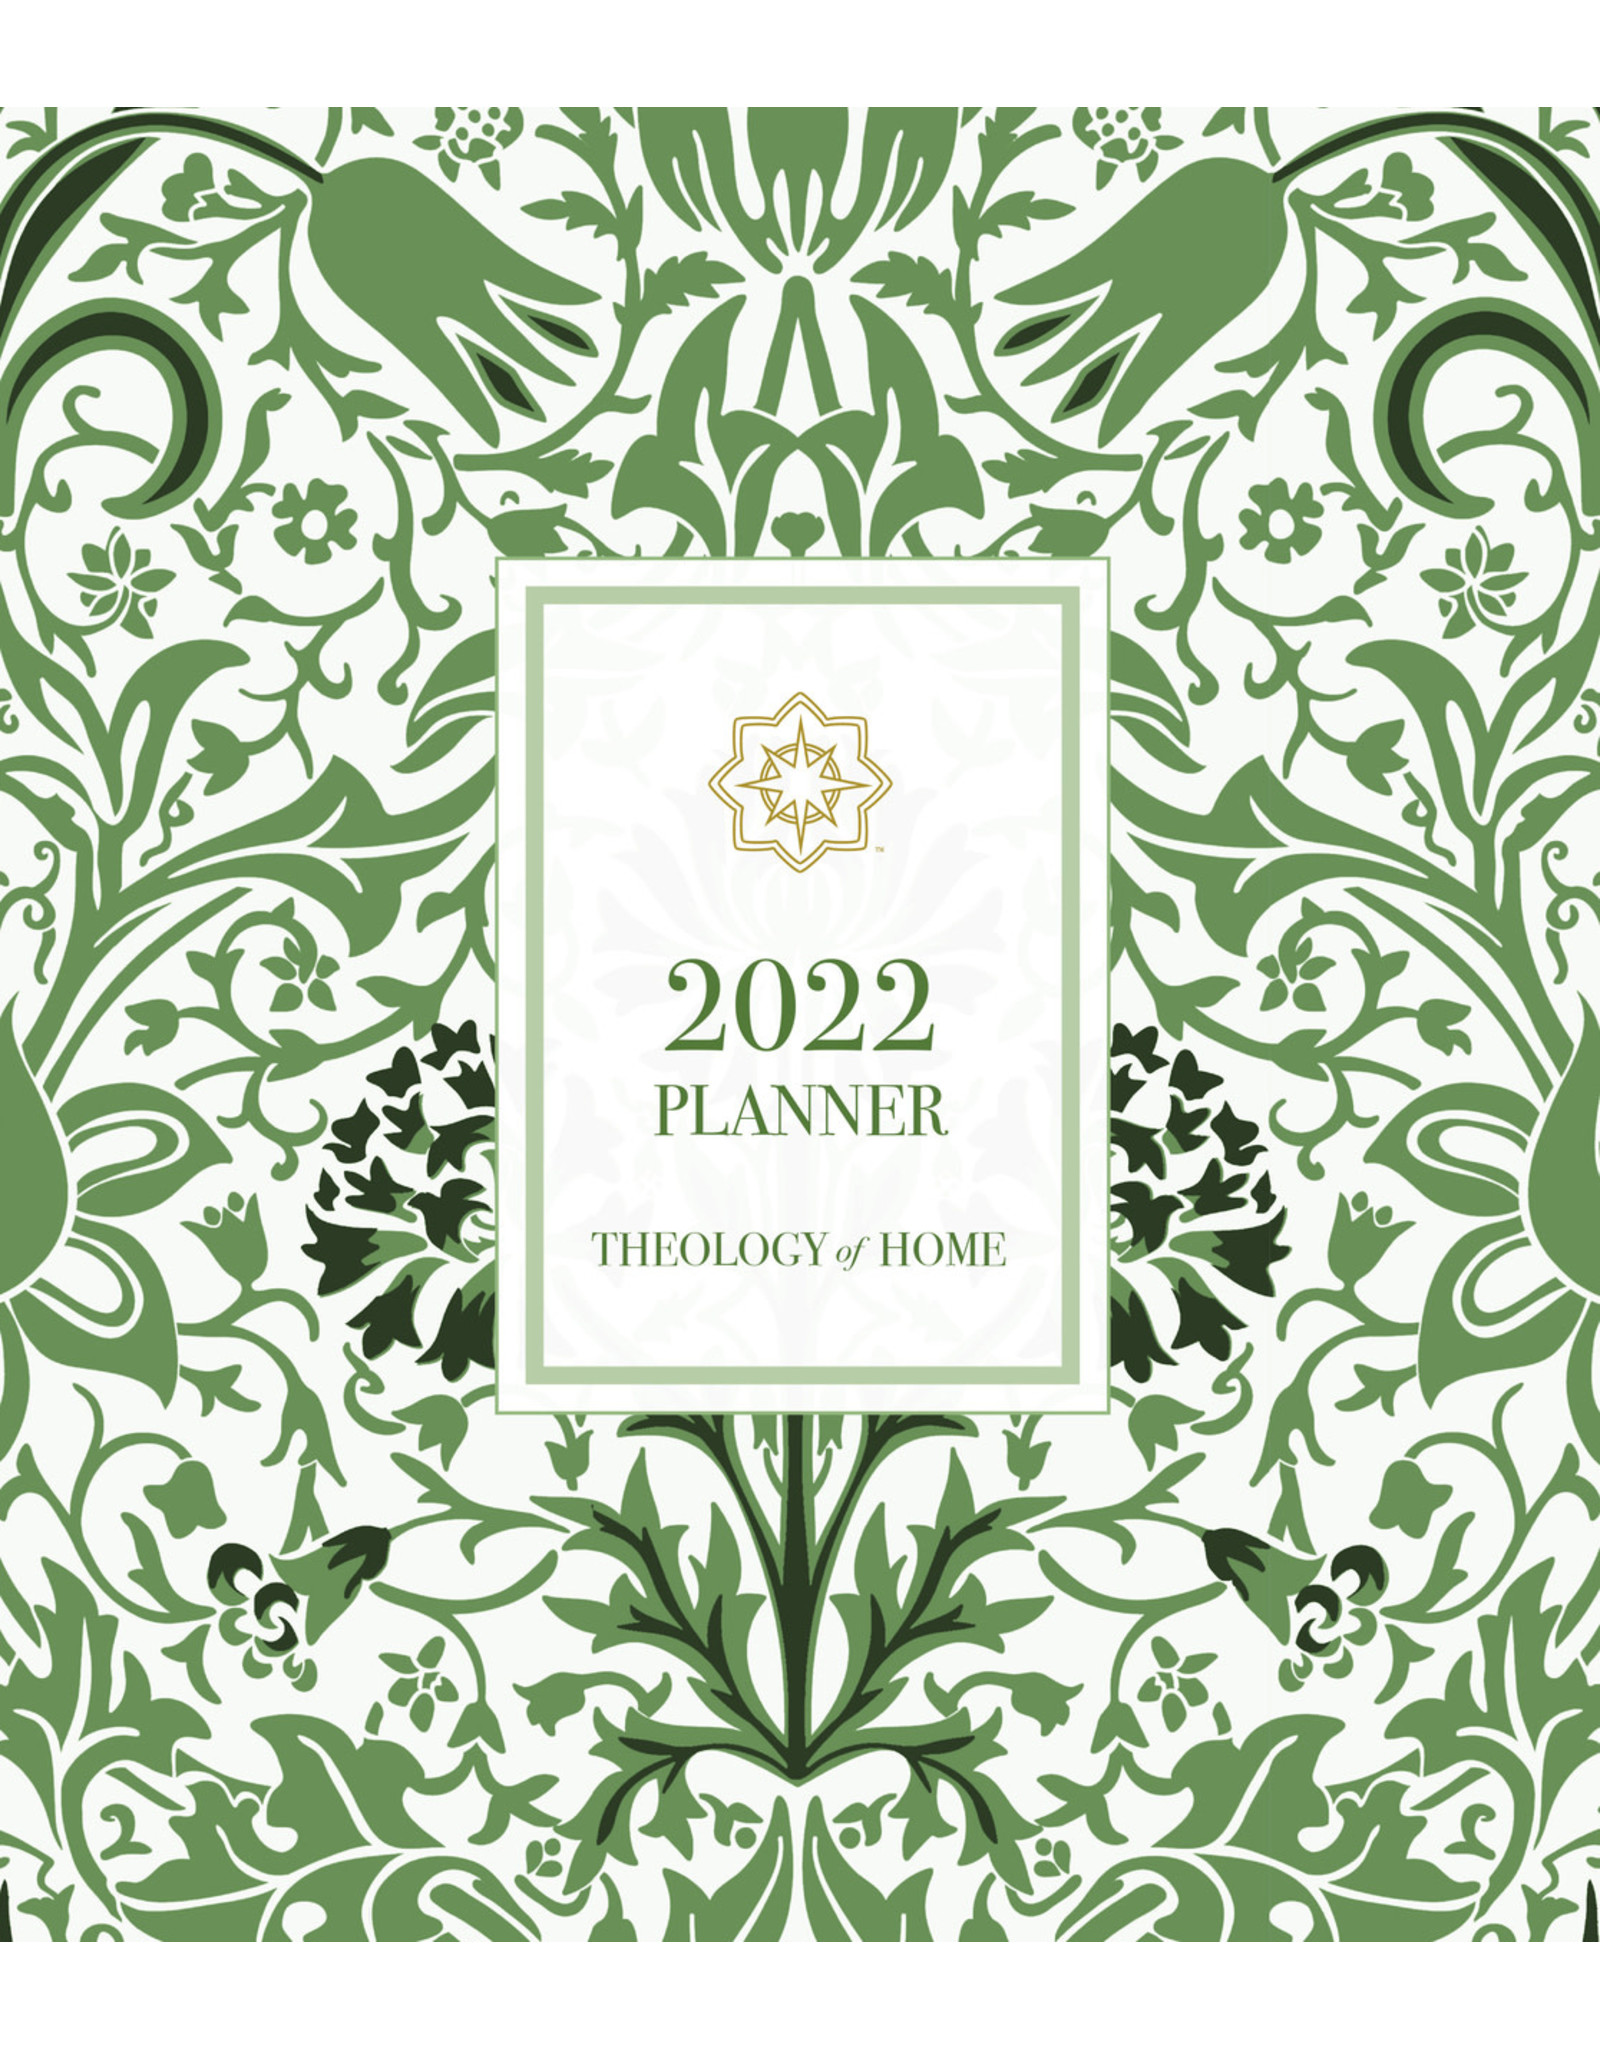 2022 Theology of Home Planner 2022